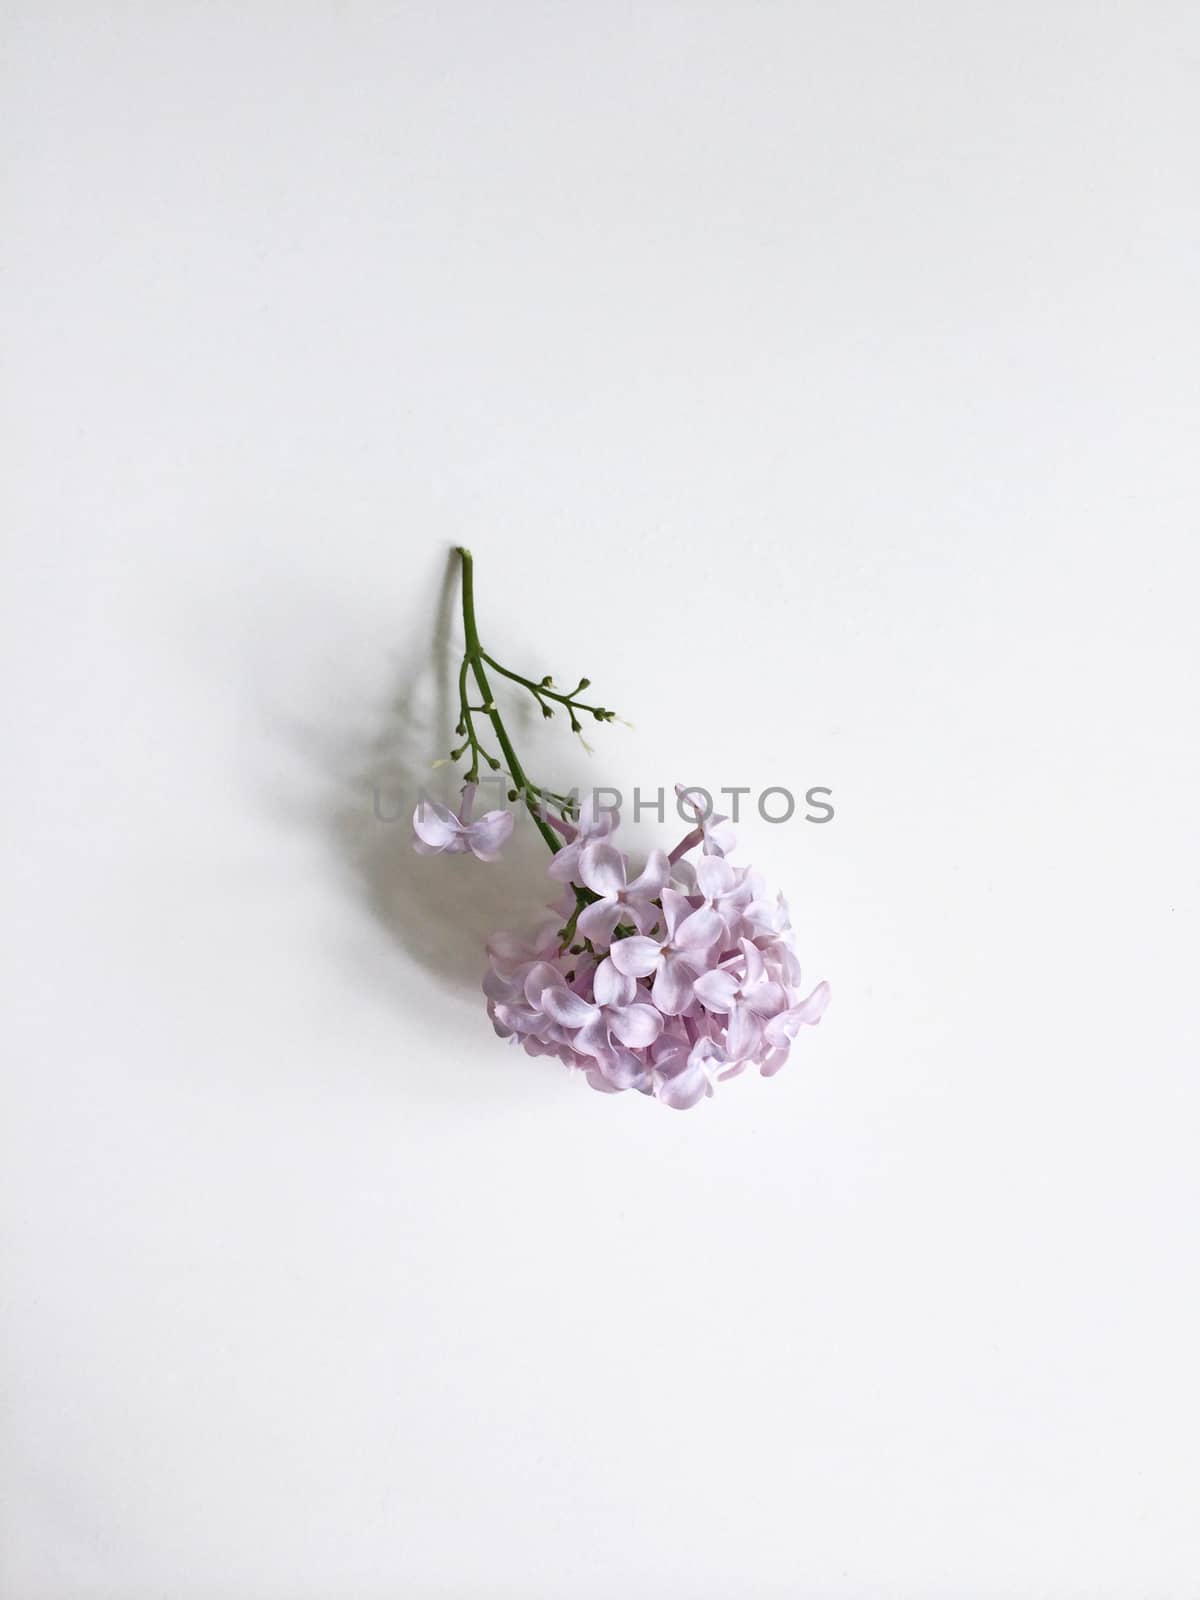 Trimmed lilac sprig on a white background